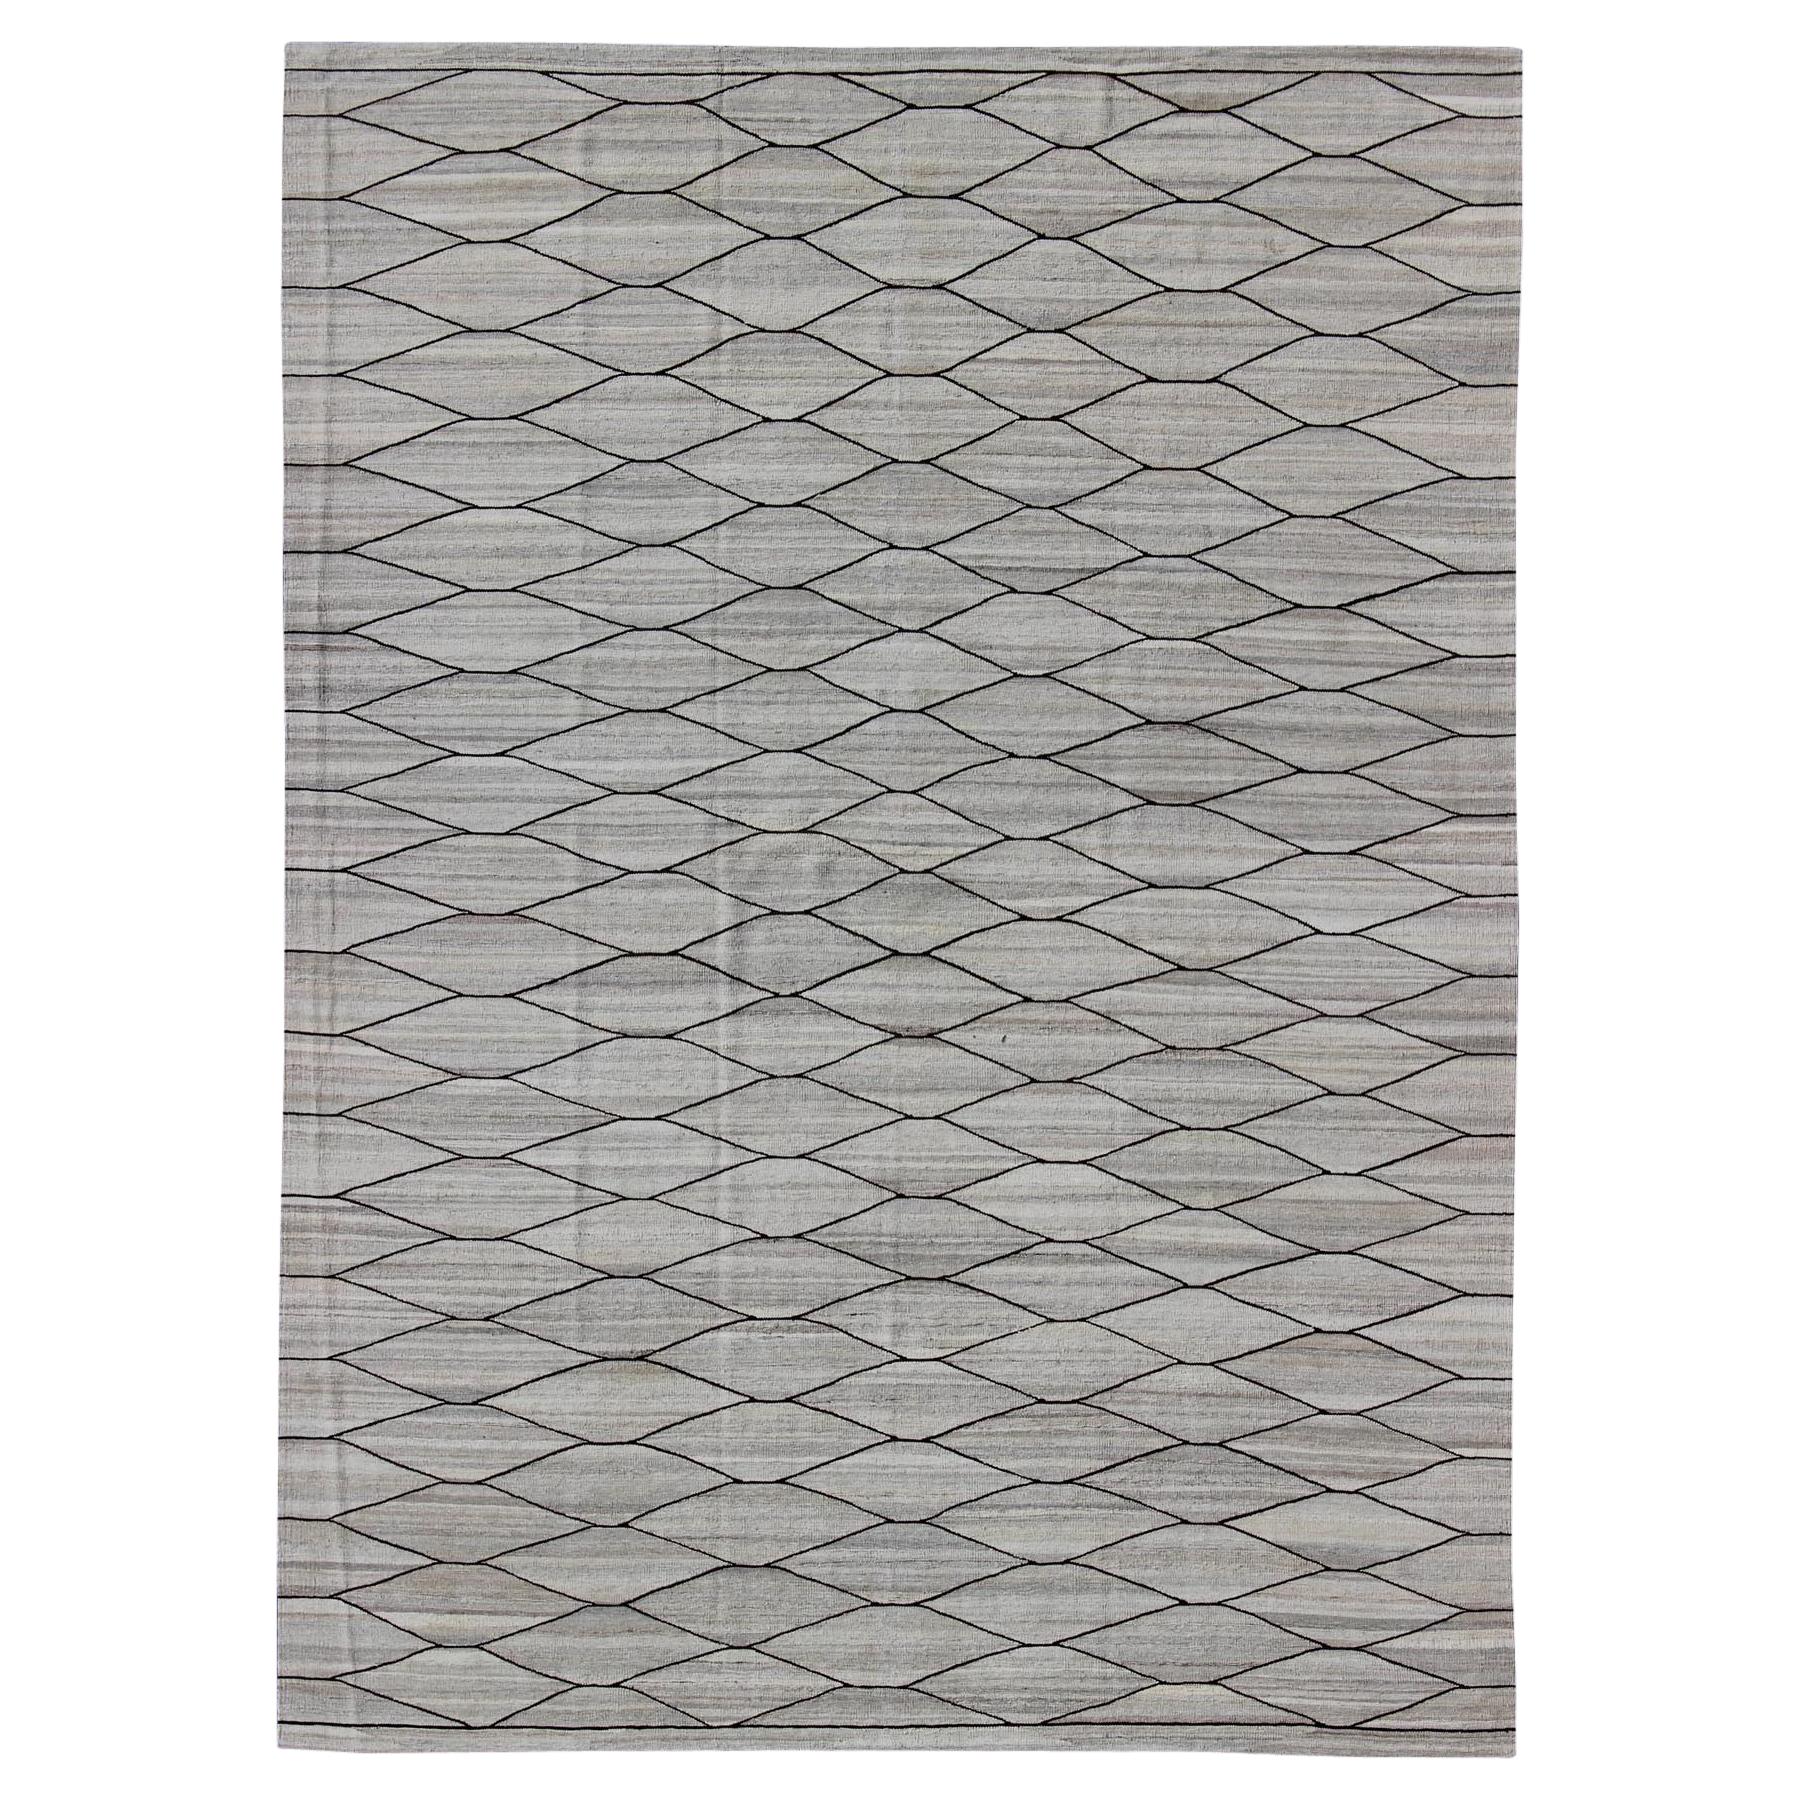 Natural Color Tone Hand Woven Flat-Weave Kilim  For Sale